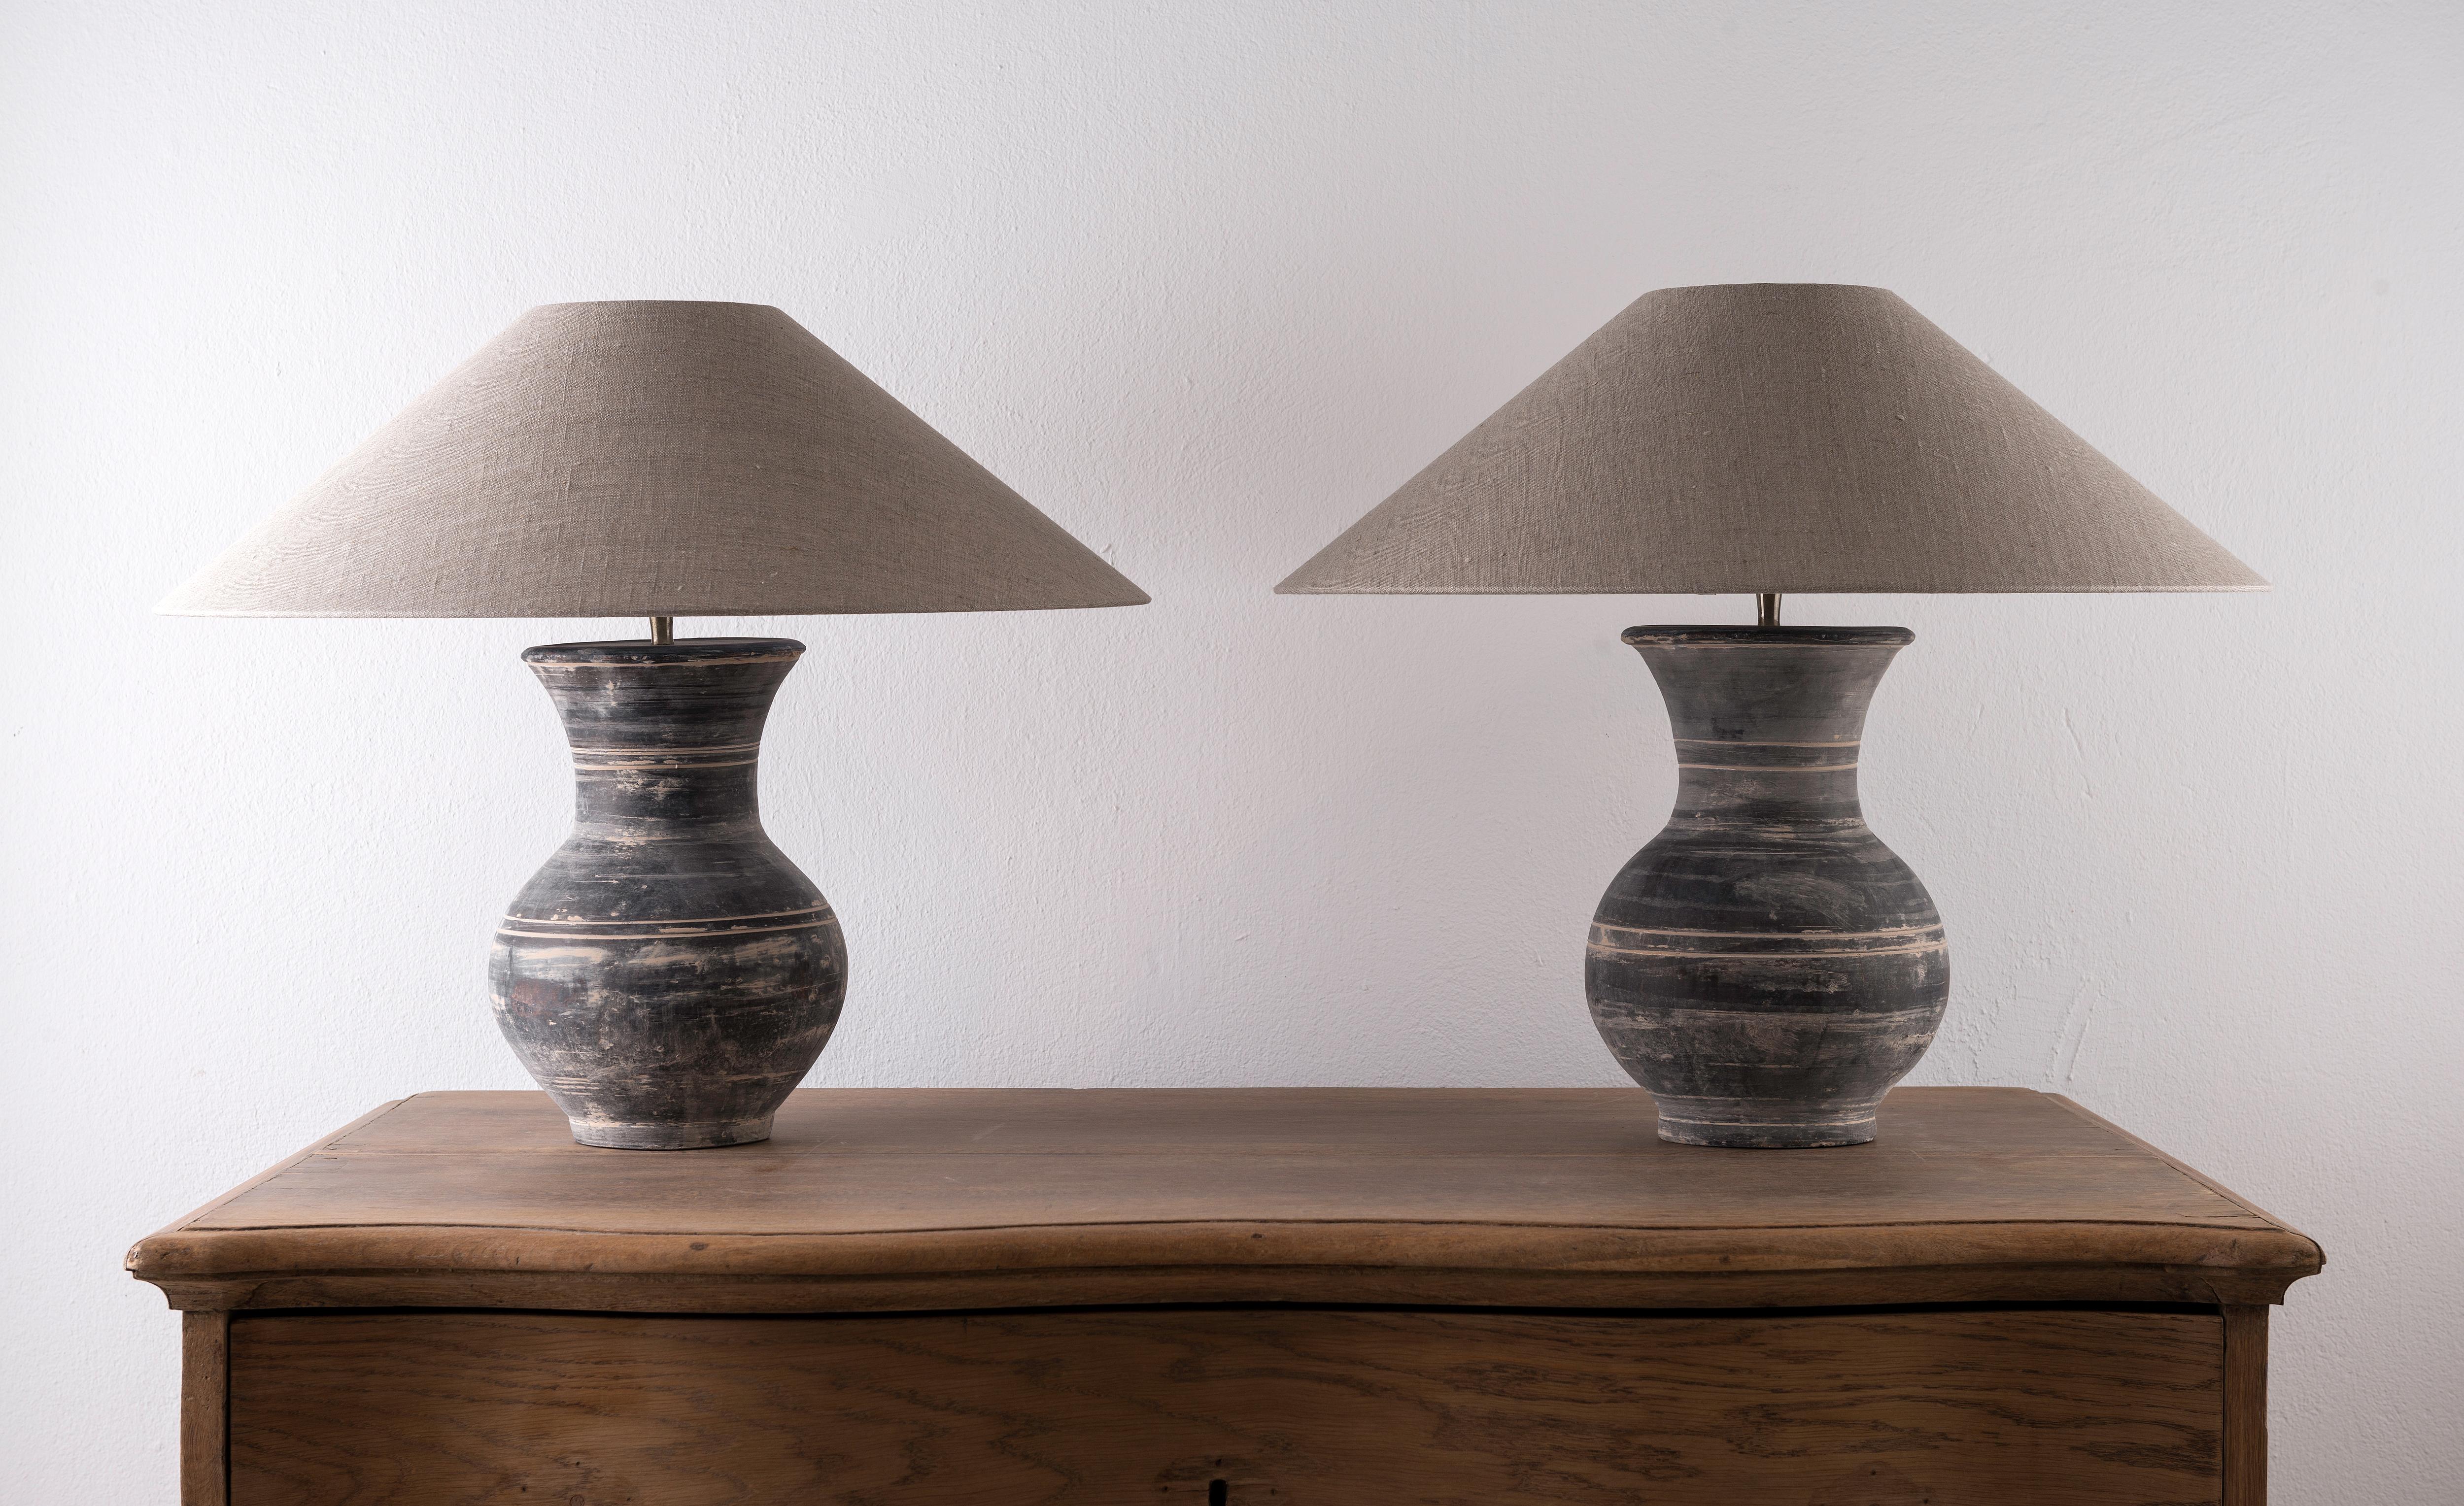 A beautiful pair of unglazed Han dynasty style vases of very elegant baluster form.
Expectedly mounted as lamps. High quality mount with a brass adjustable pivot joint. Shade handmade in Belgium.
The vases are from Zhejiang, china, mount and shade